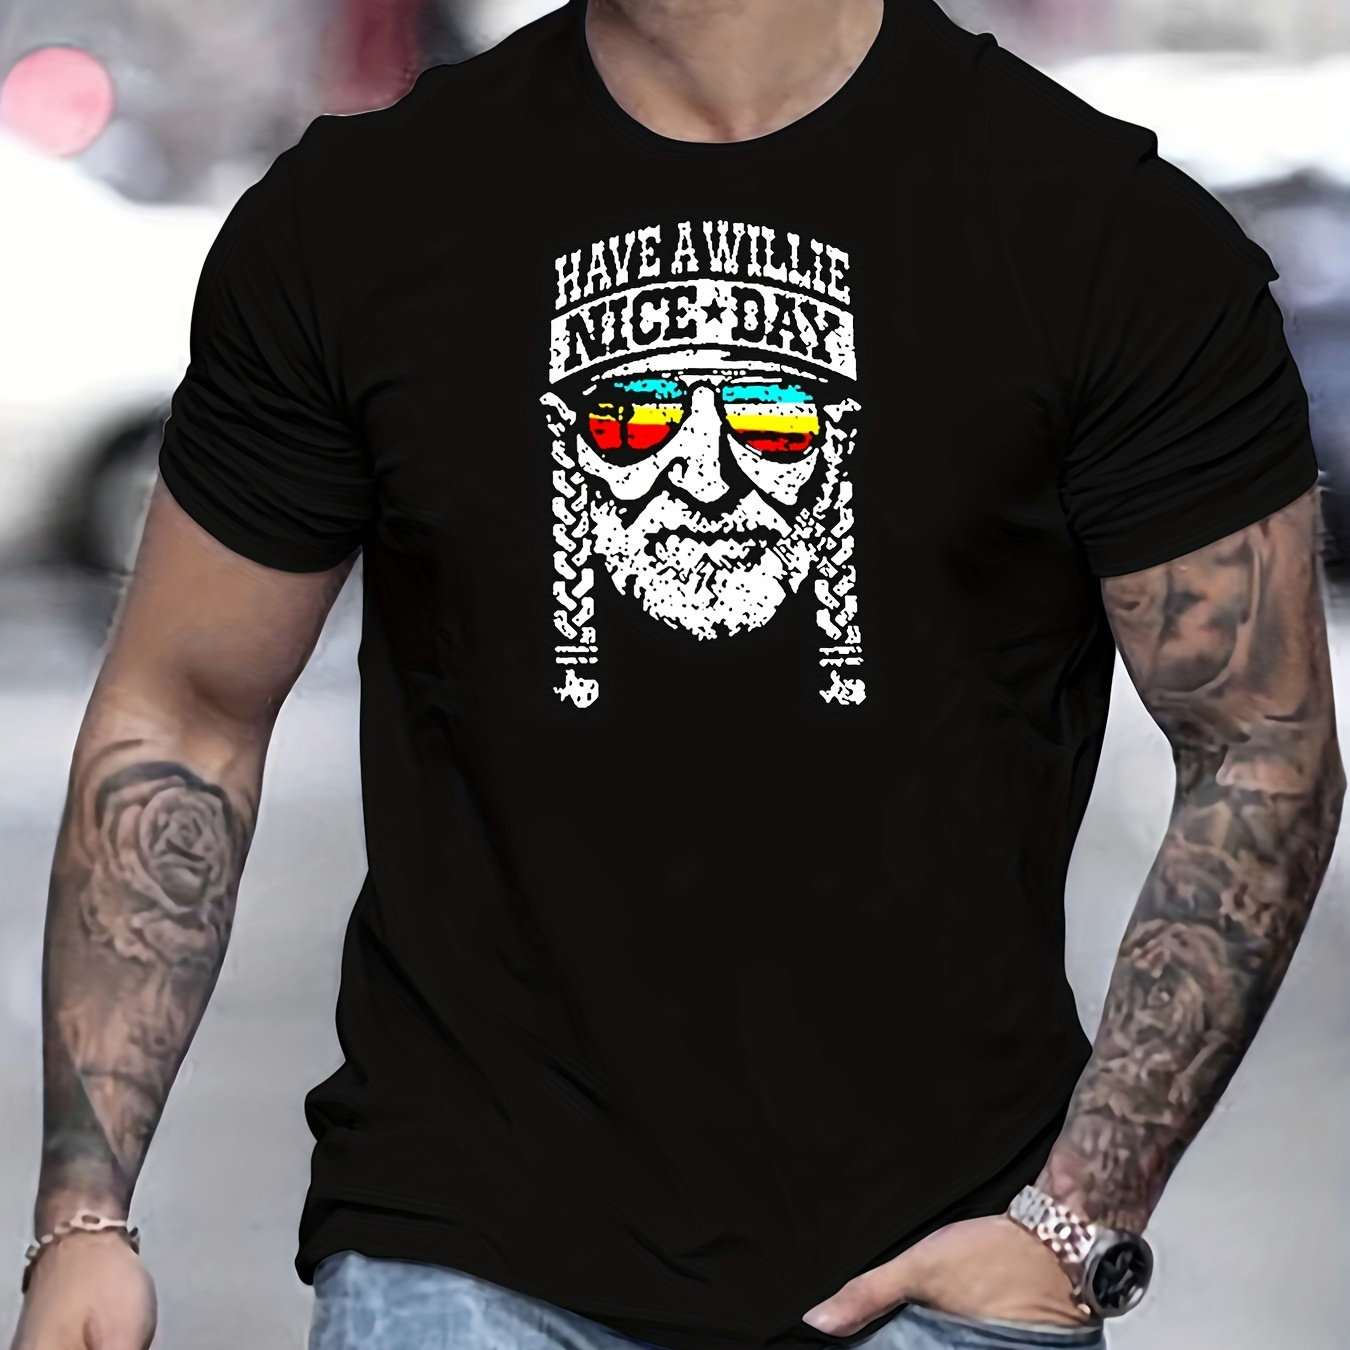 

Have A Willie Nice Day Print T Shirt, Tees For Men, Casual Short Sleeve T-shirt For Summer